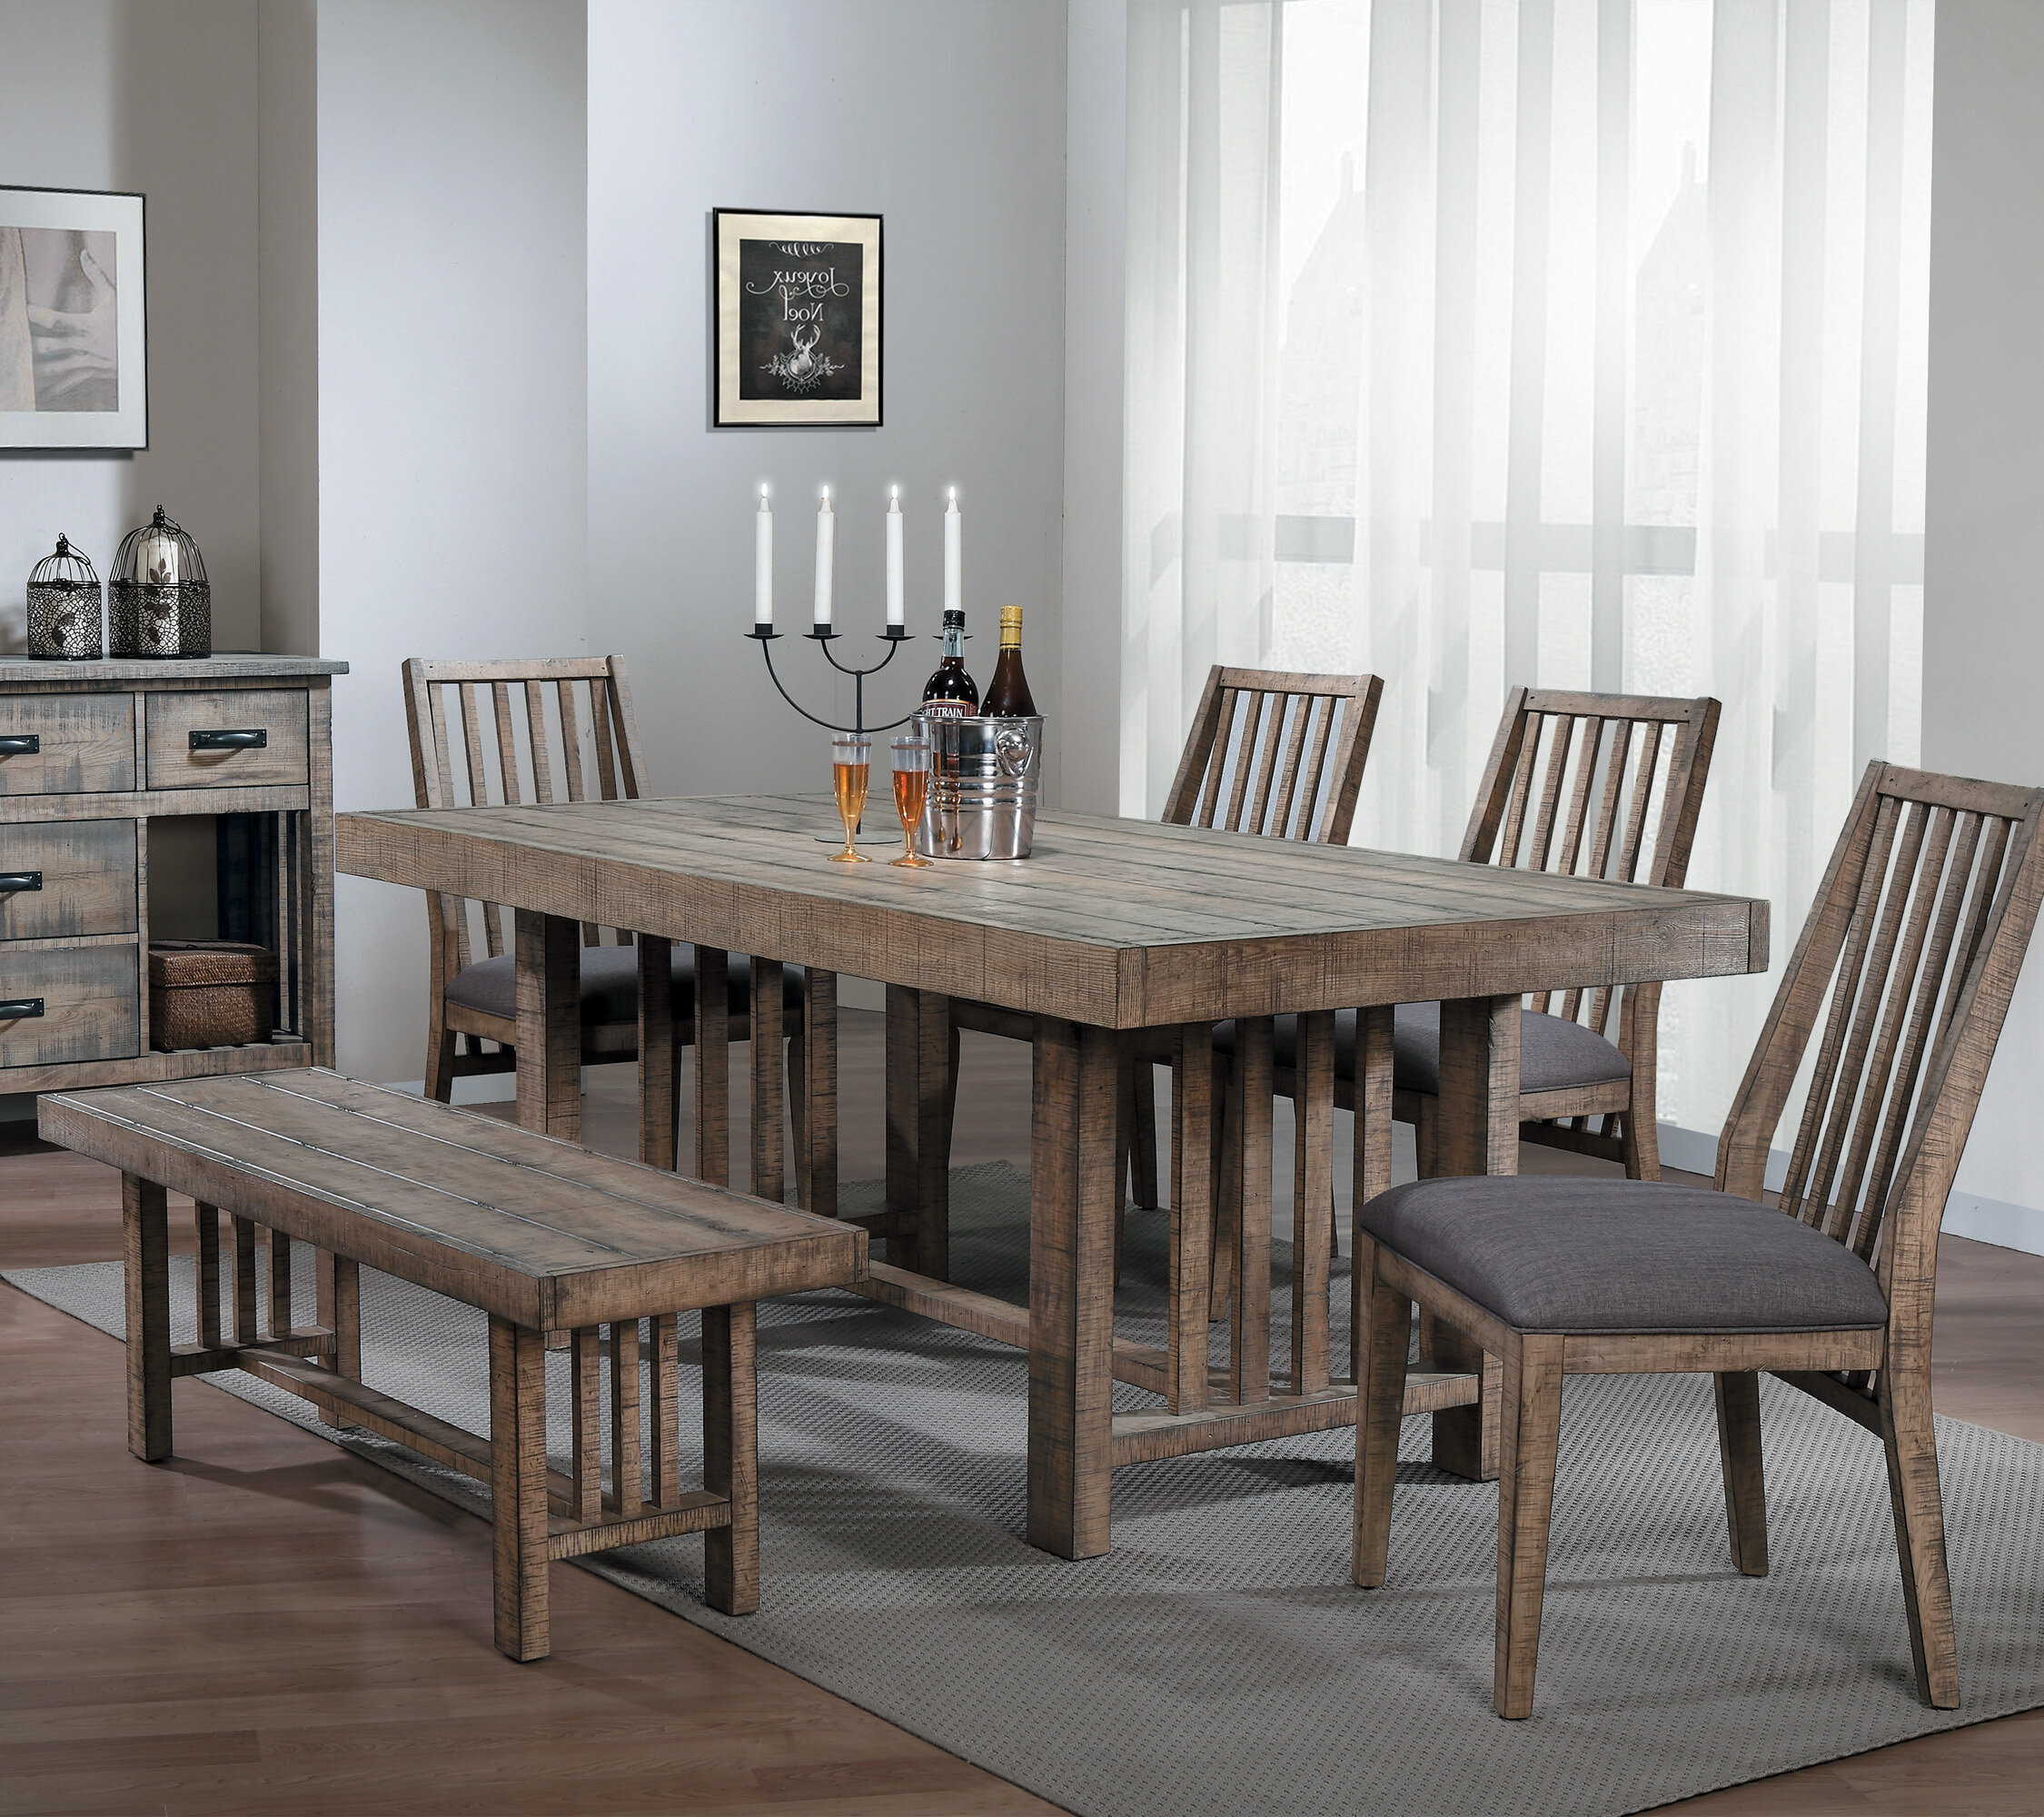 Rustic Kitchen Table And Chairs Shop, 20 OFF   www.ingeniovirtual.com